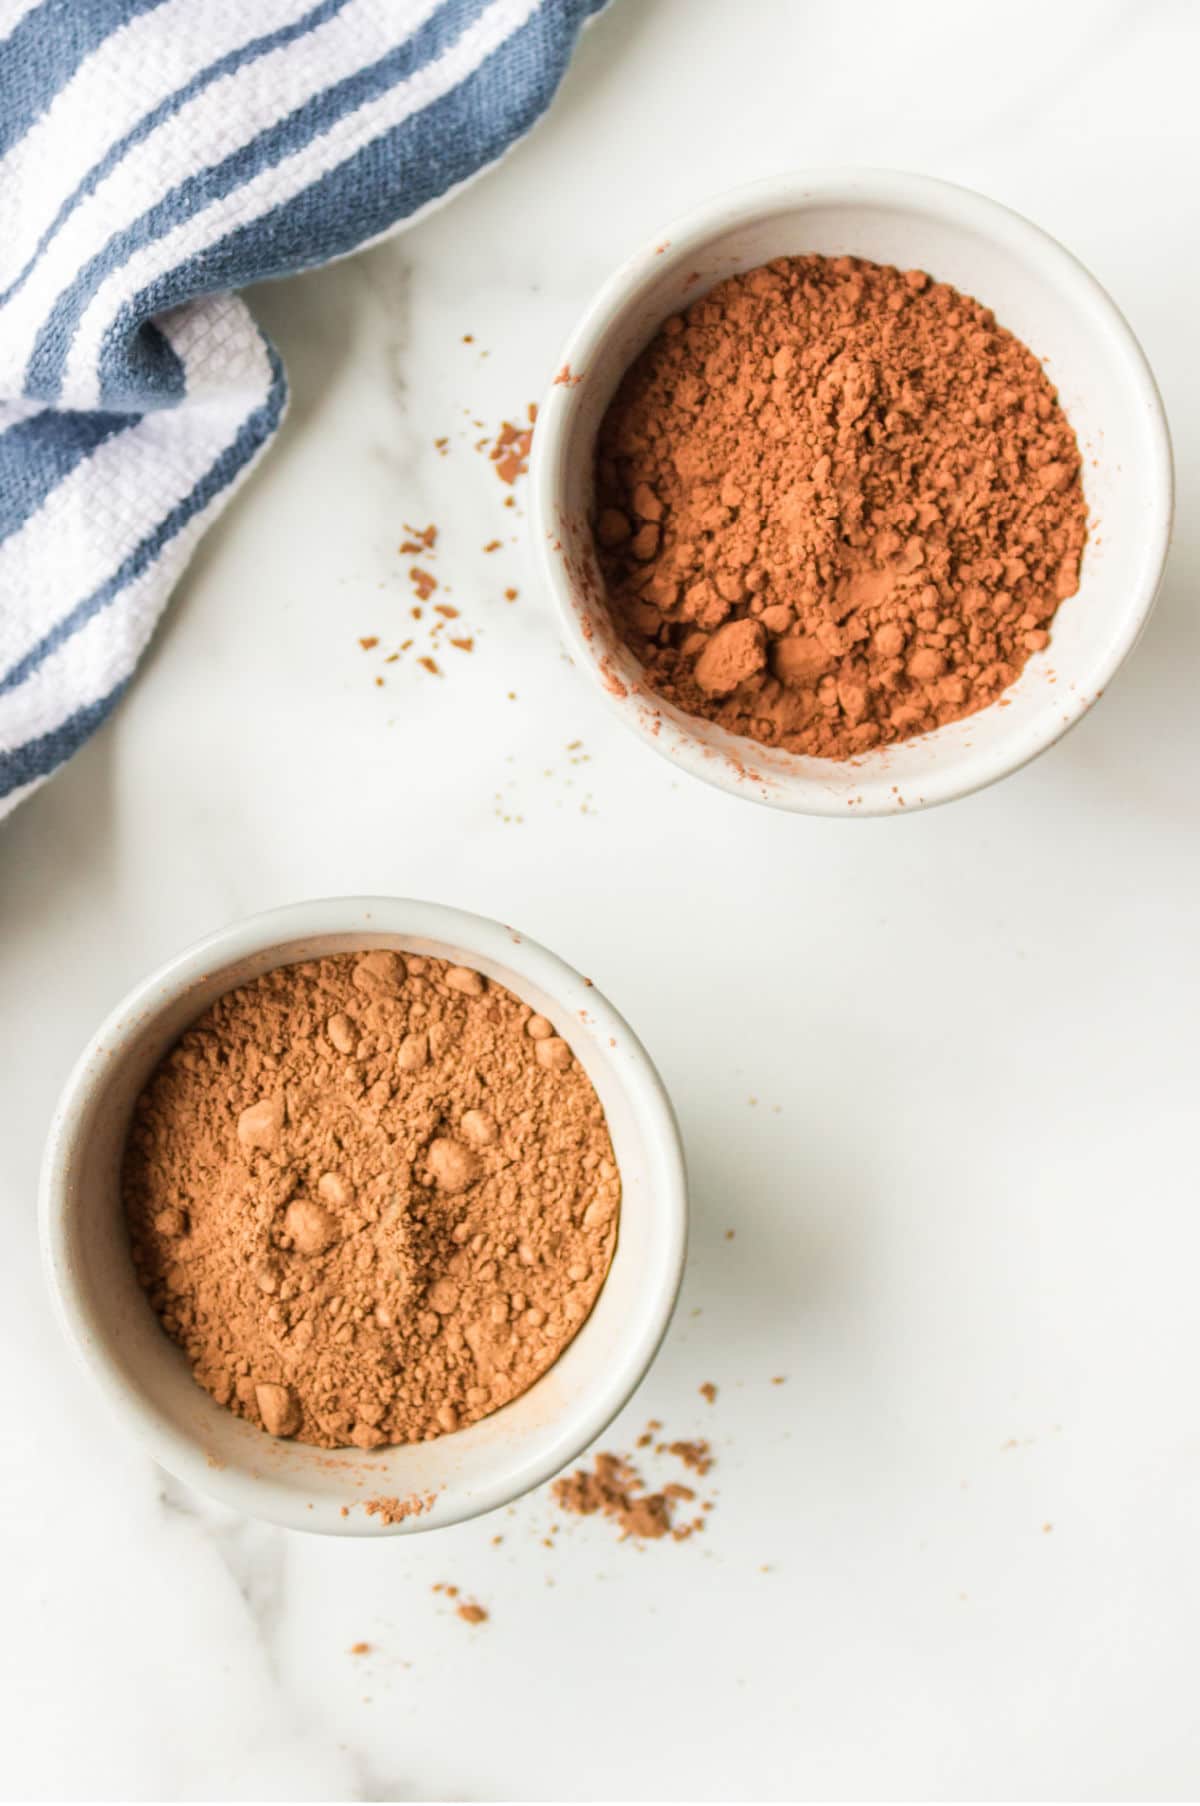 A dish of unsweetened cocoa powder next to a dish of Dutch-processed cocoa powder. 